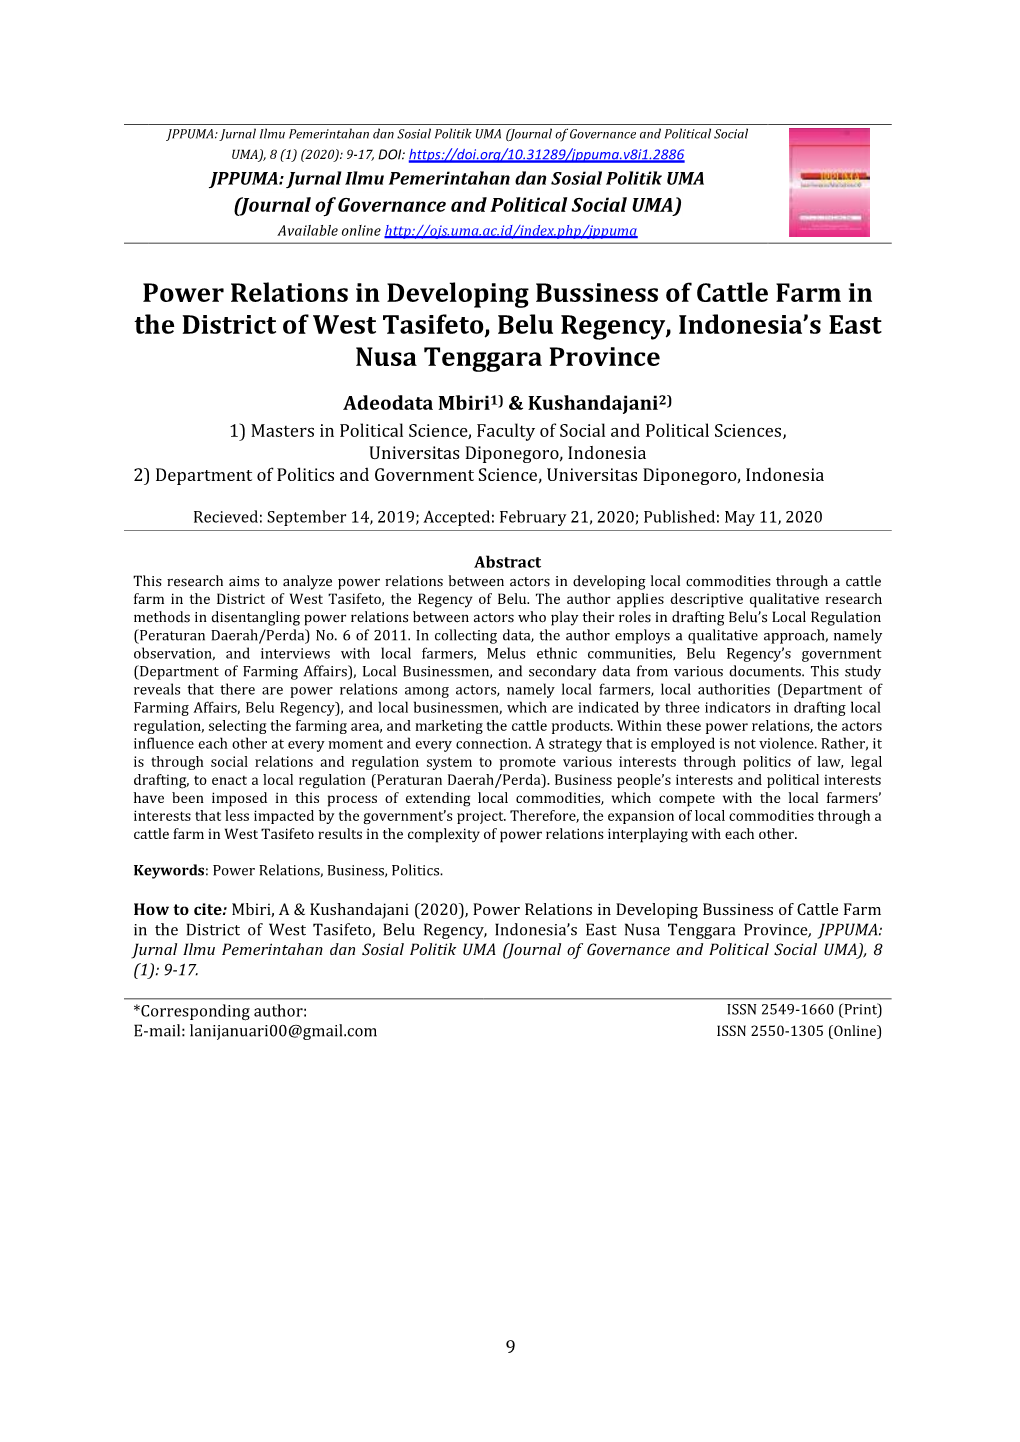 Power Relations in Developing Bussiness of Cattle Farm in the District of West Tasifeto, Belu Regency, Indonesia’S East Nusa Tenggara Province